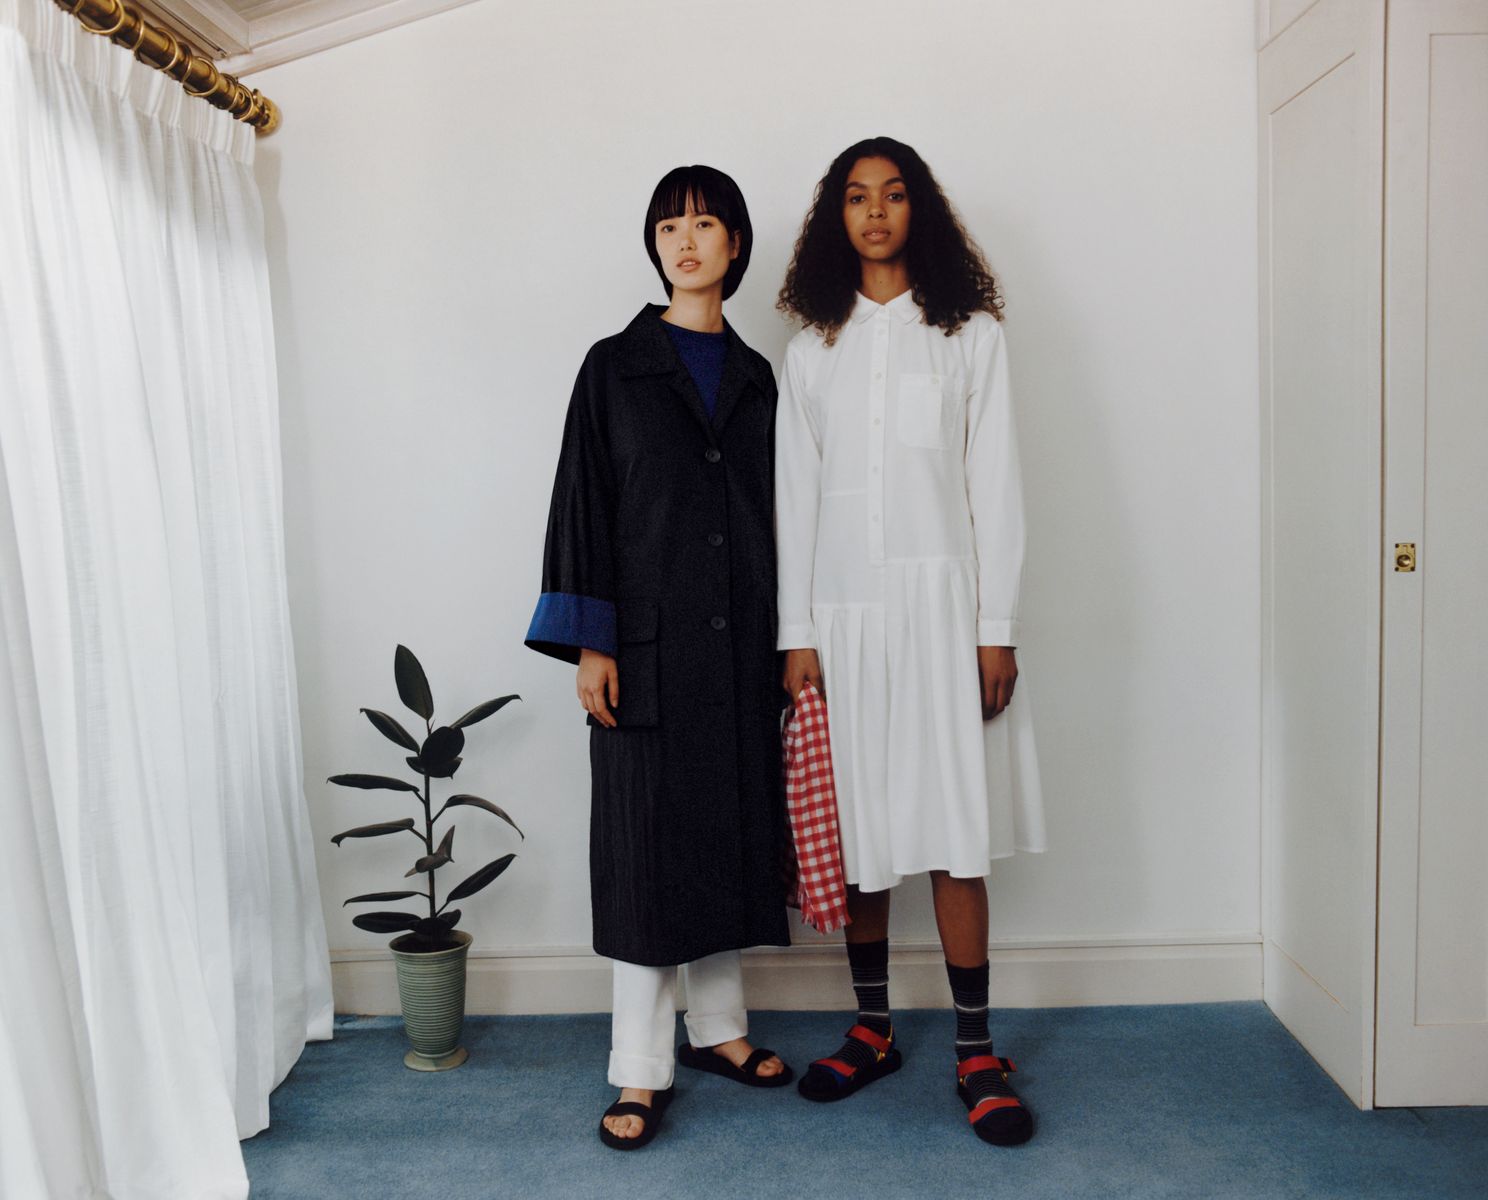 Uniqlo Just Announced Another Collection With JW Anderson - Grazia